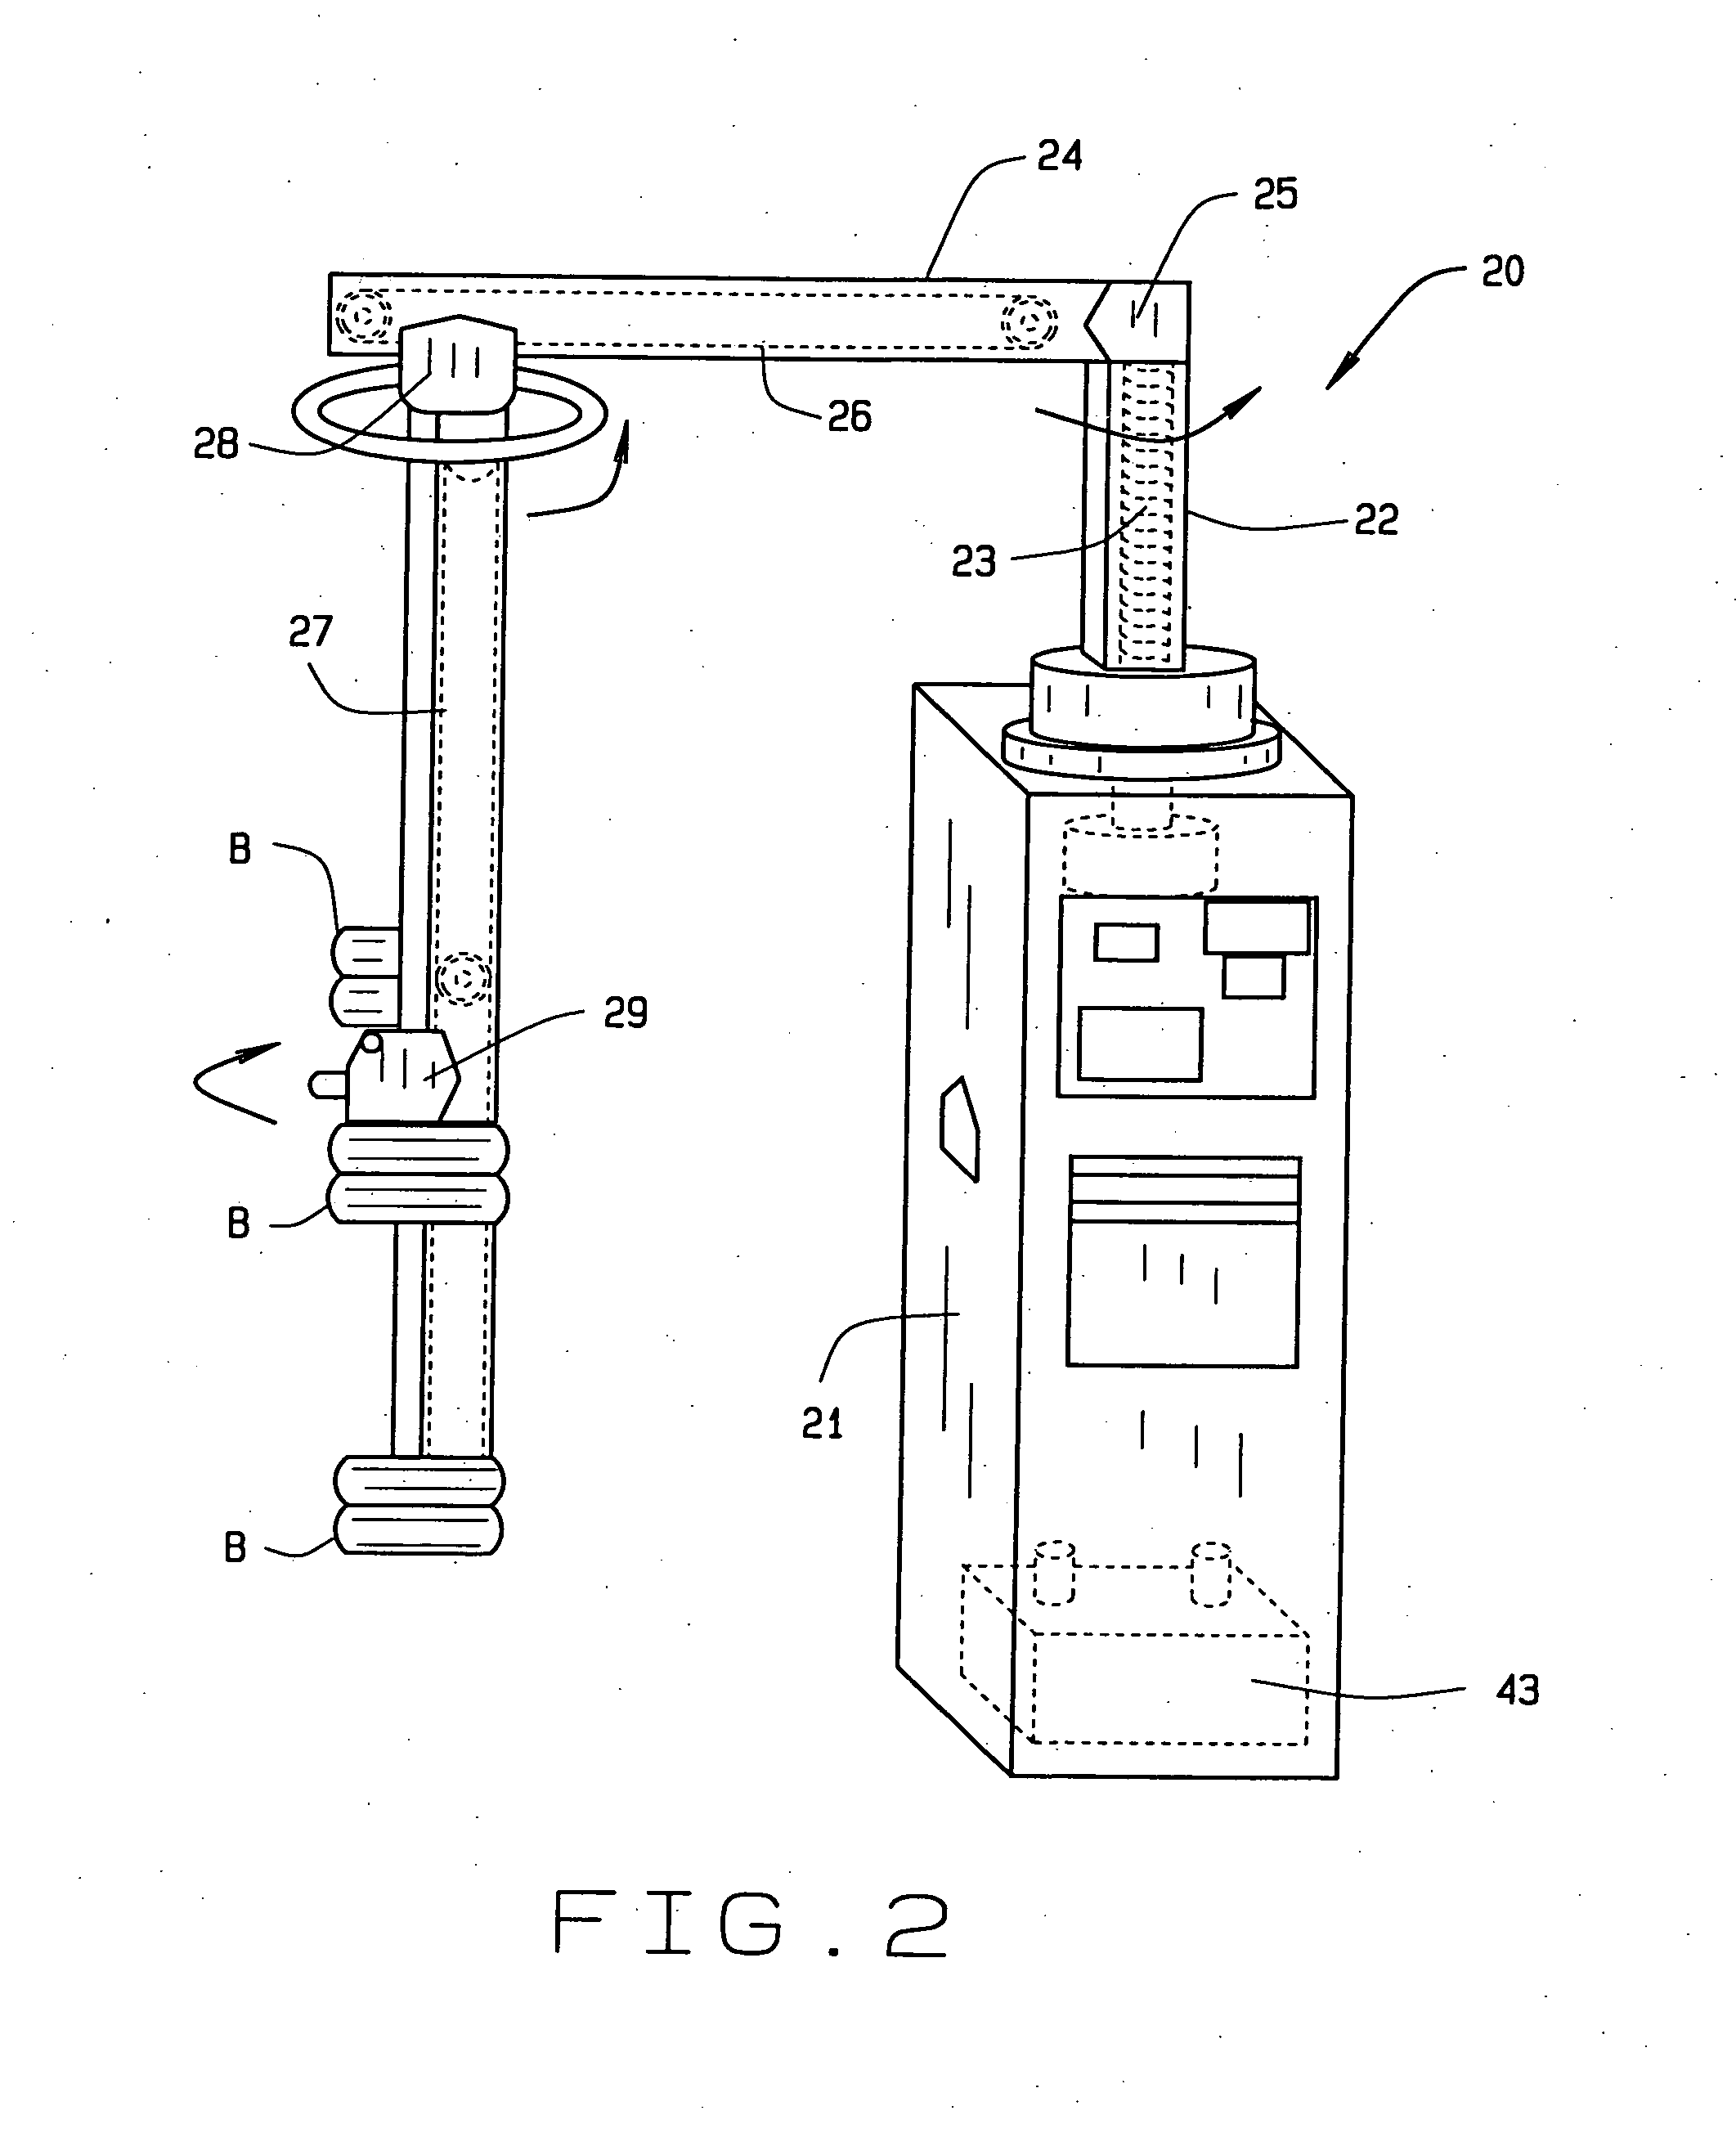 Method and process for an electric vehicle charging system to automatically engage the charging apparatus of an electric vehicle